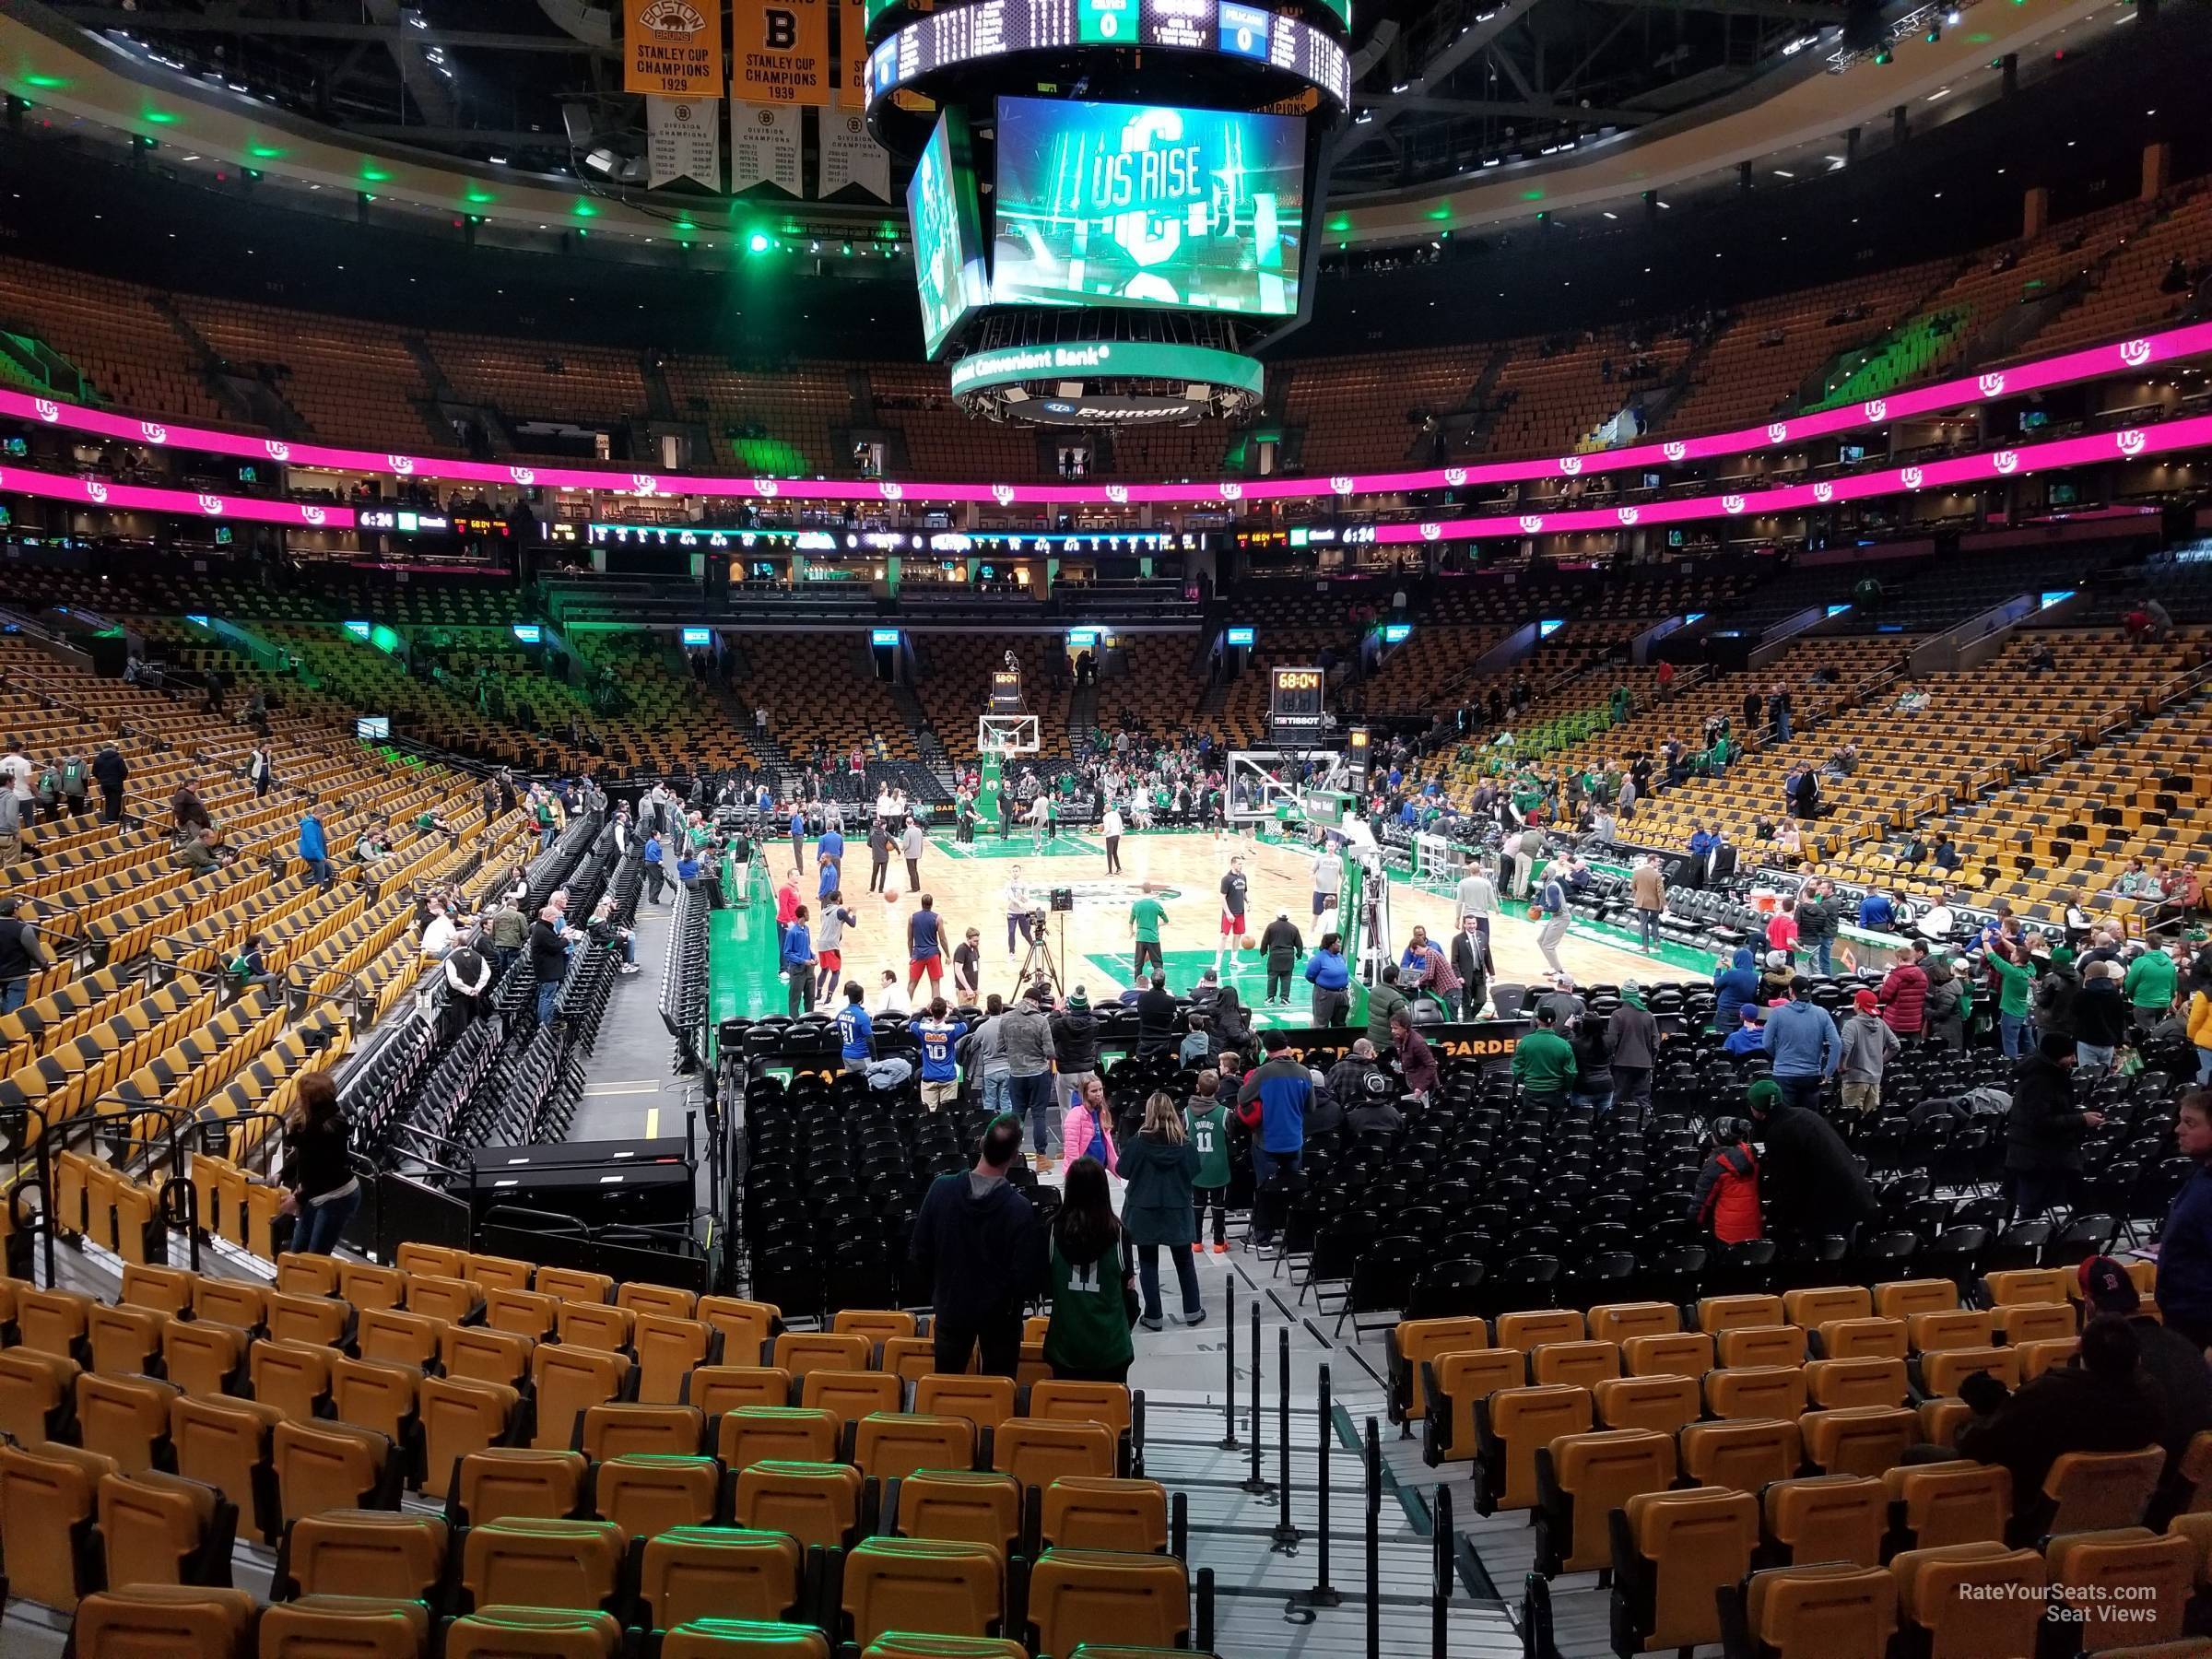 loge 8, row 13 seat view  for basketball - td garden